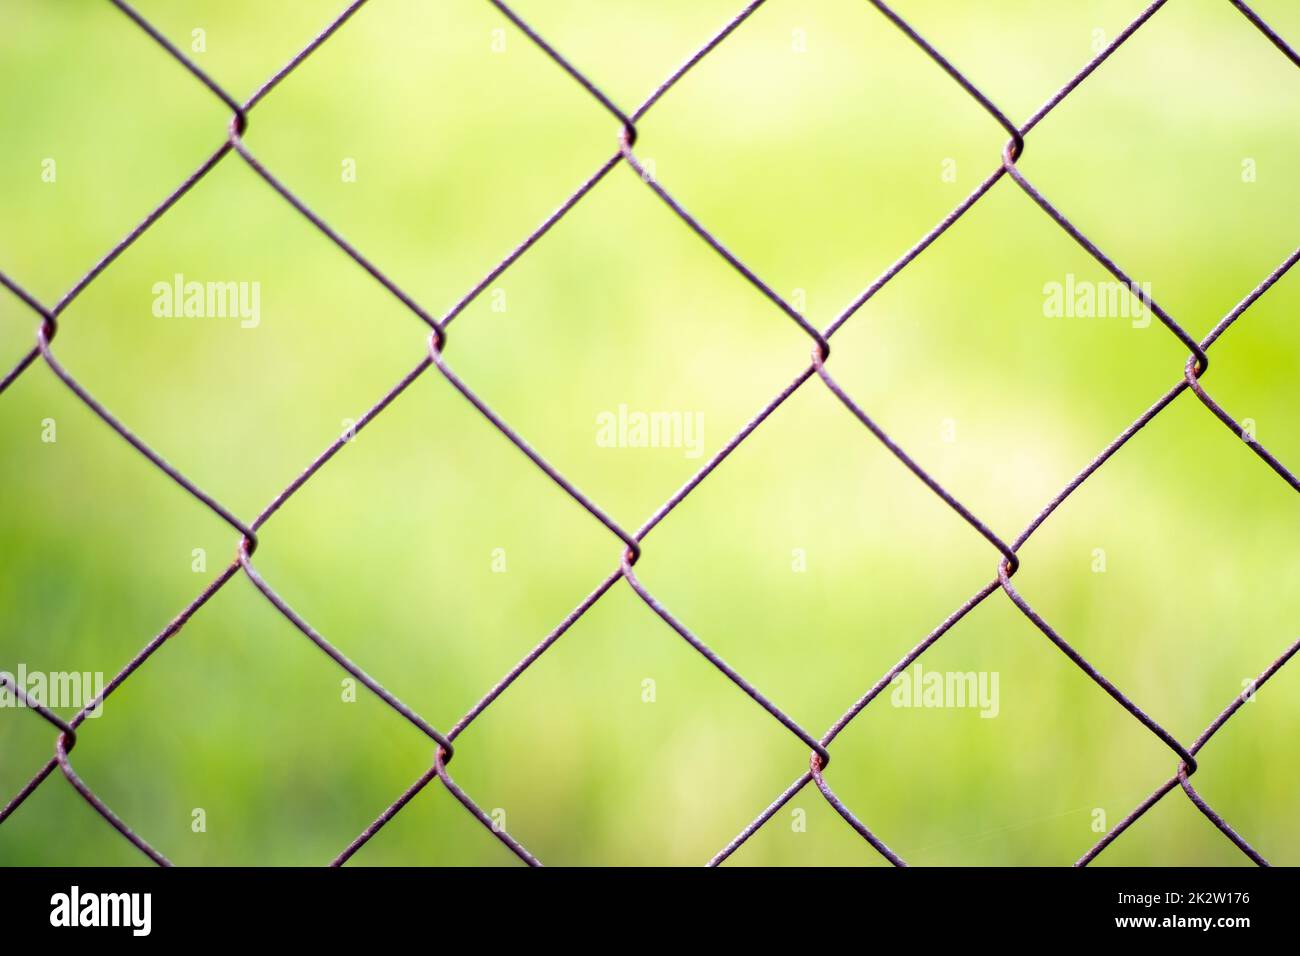 Mesh cage in the garden with green grass as background. Metal fence with wire mesh. Blurred view of the countryside through a steel iron mesh metal fence on green grass. Abstract background. Stock Photo